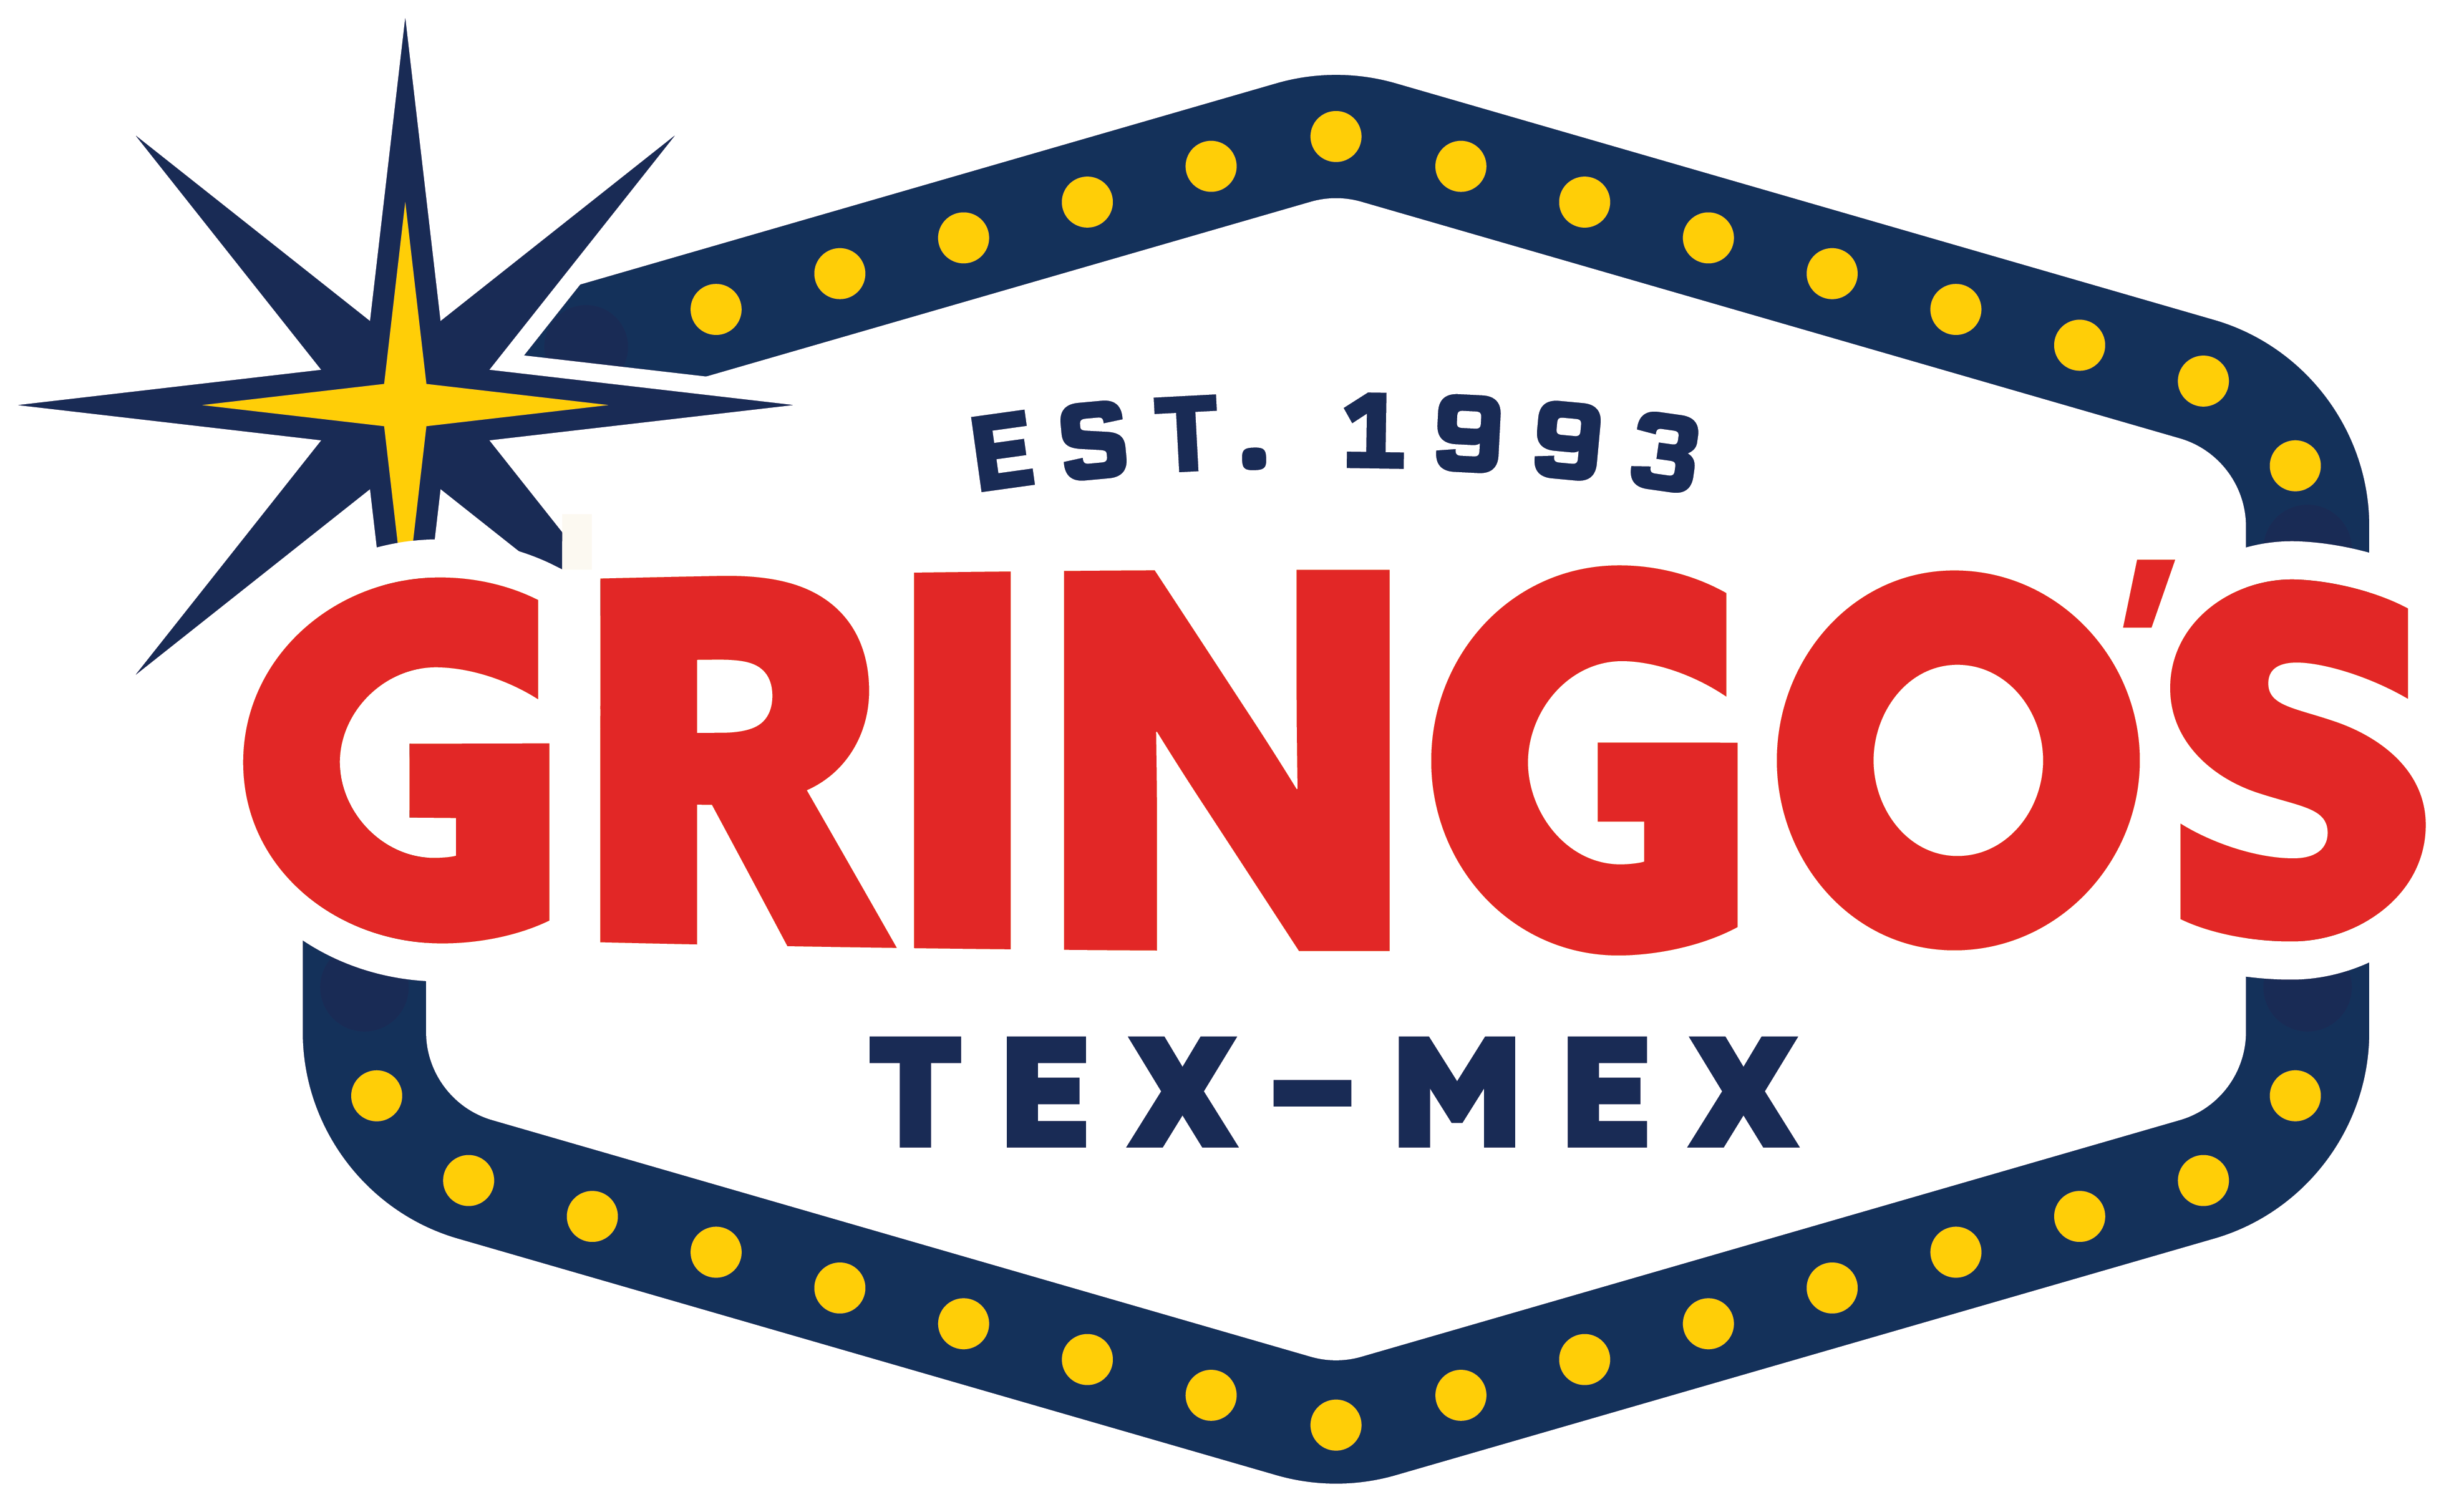 Welcome to Fabulous Gringo's Tex-Mex